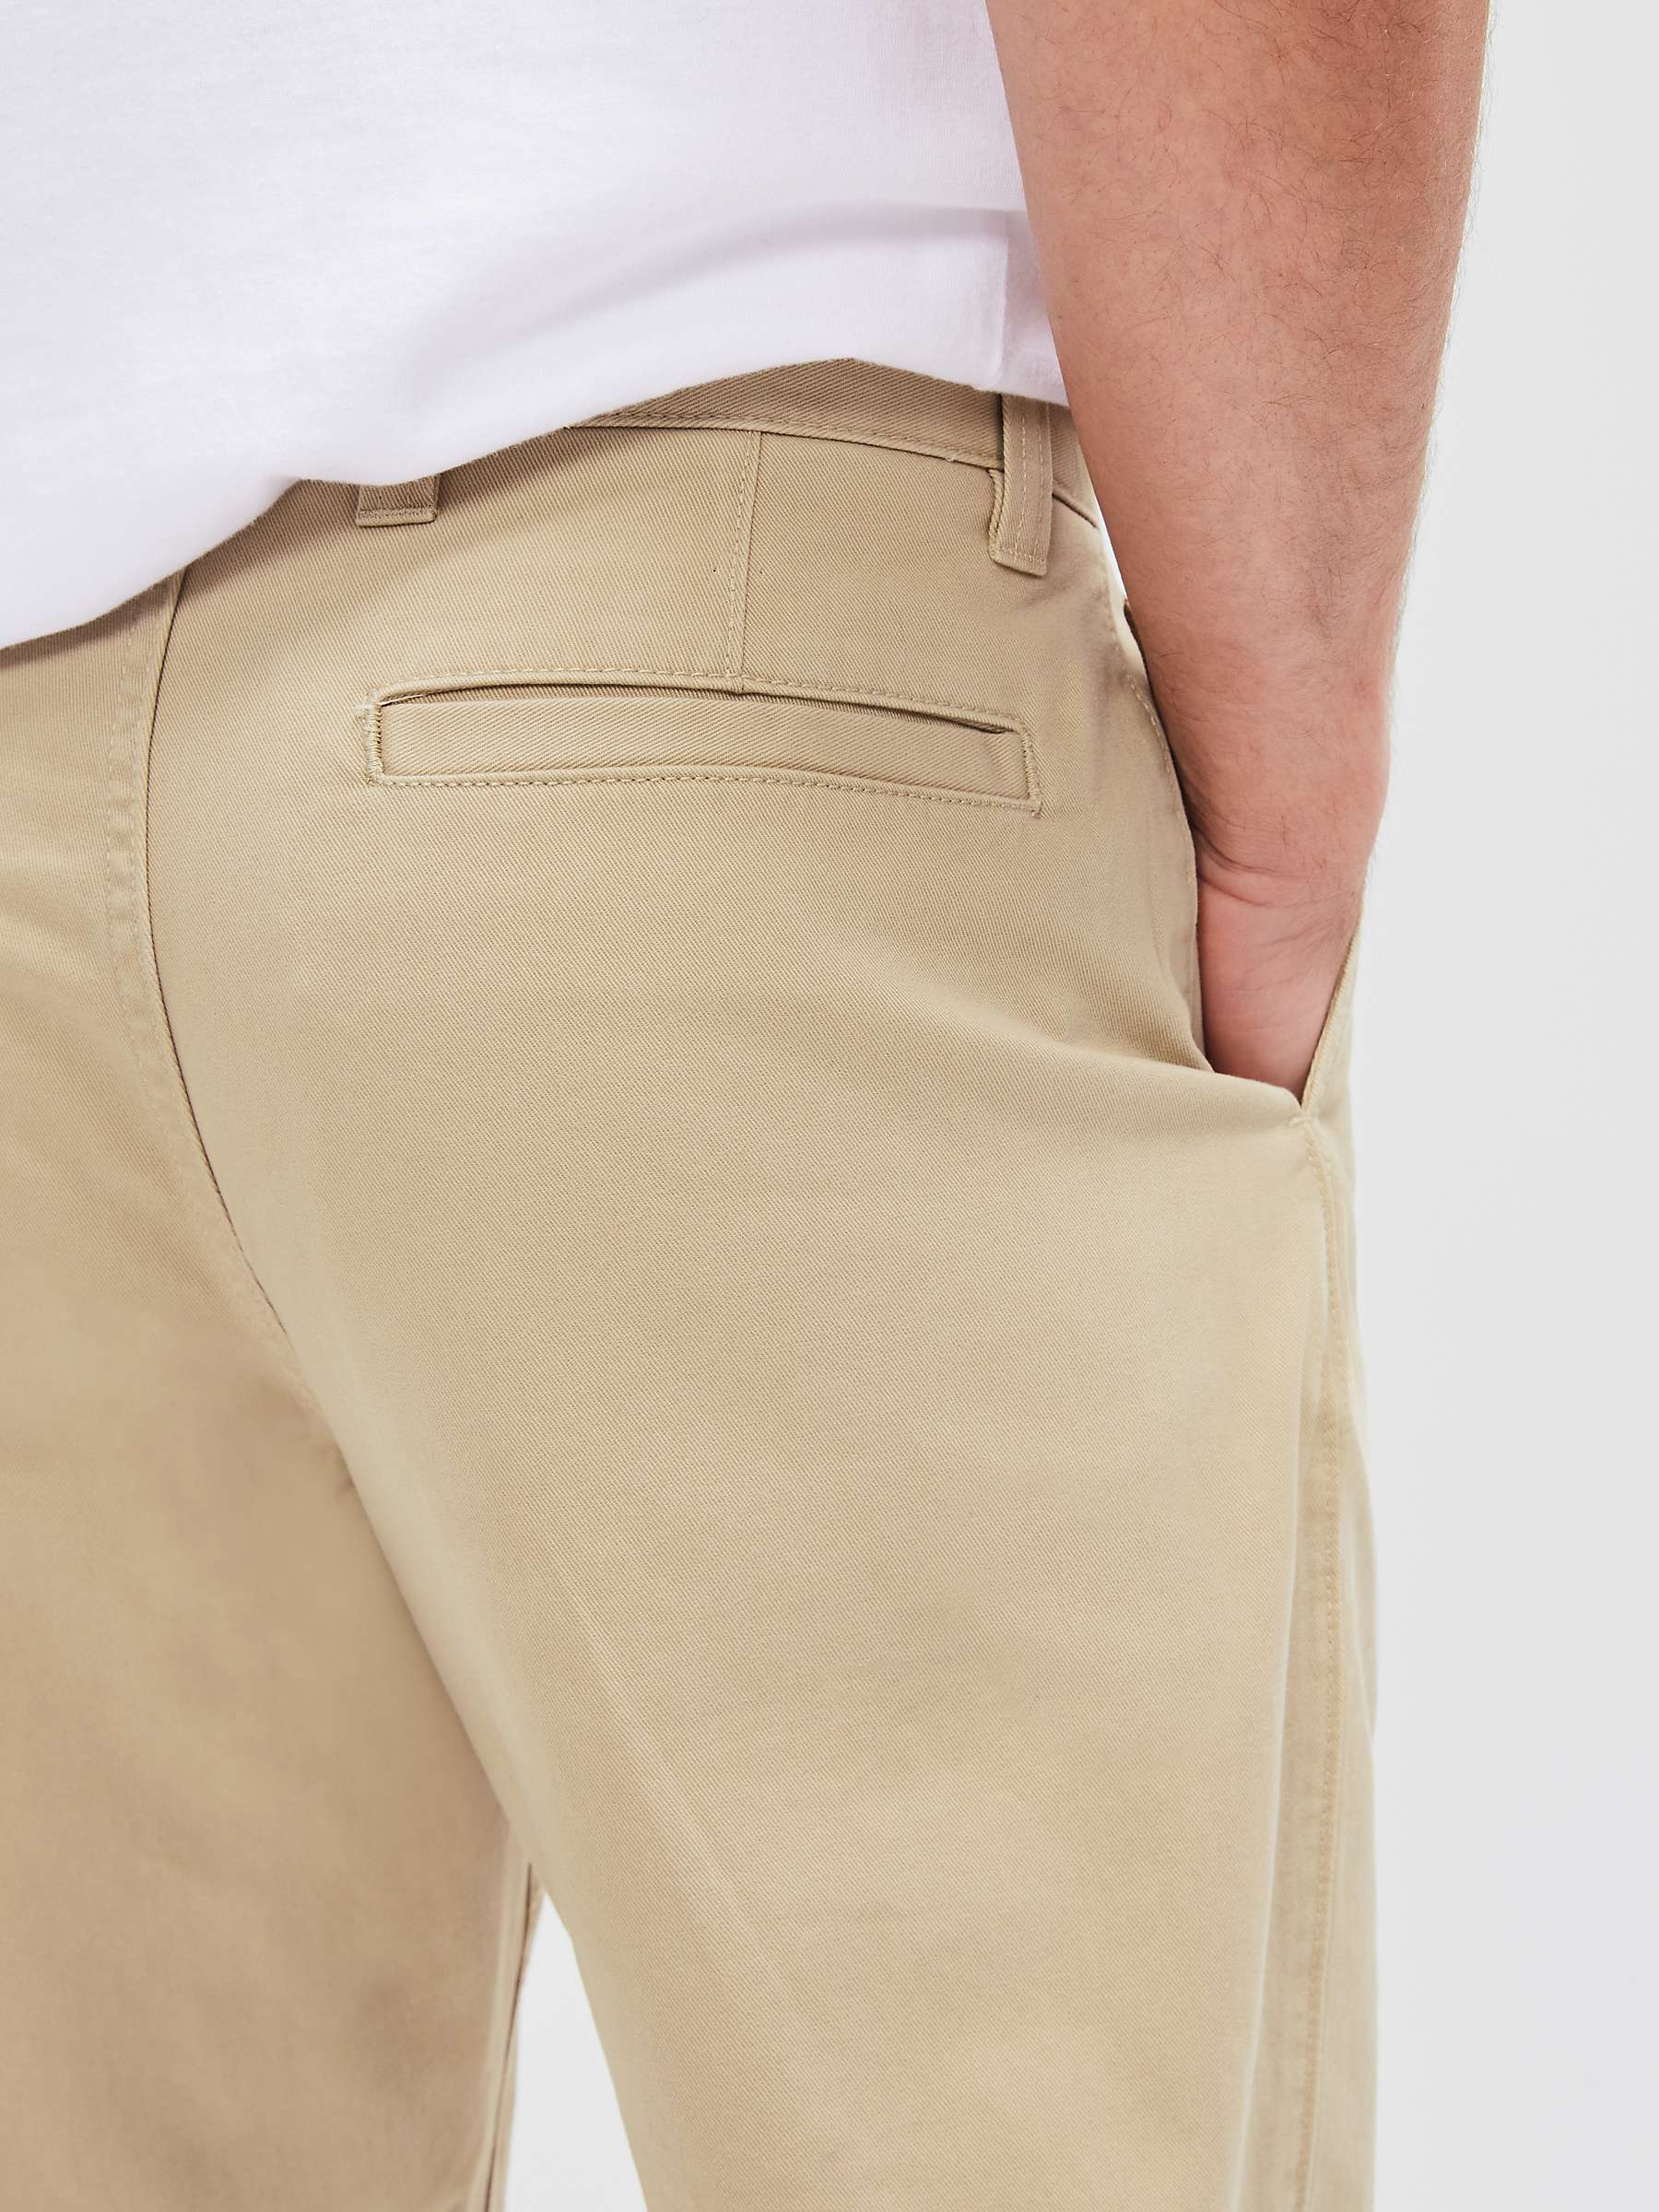 Buy John Lewis Relaxed Fit Cotton Chinos Online at johnlewis.com